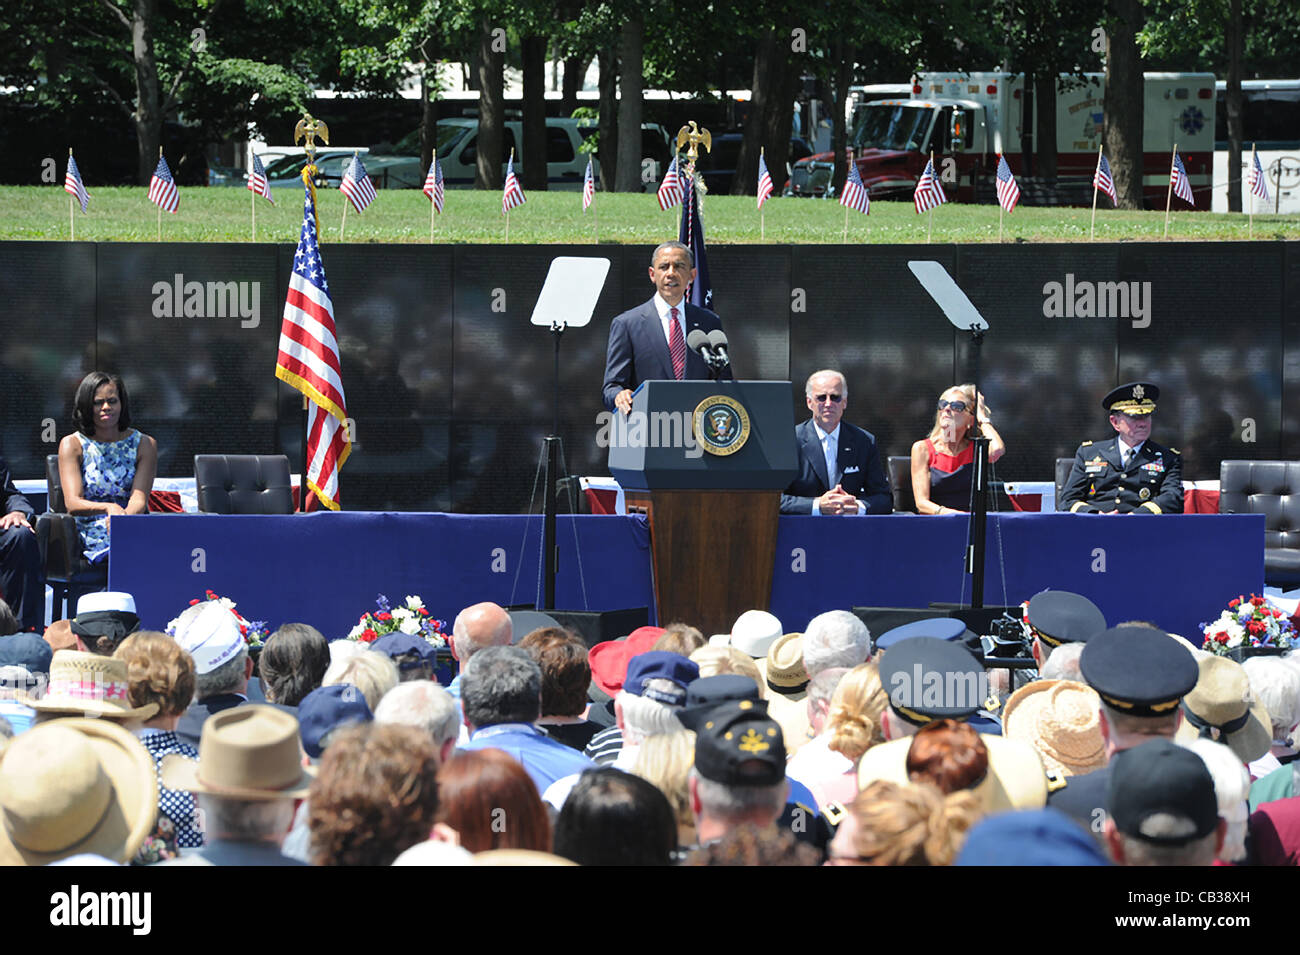 US President Barack Obama address a crowd during a ceremony commemorating the 50th anniversary of the Vietnam War at the Vietnam Veterans Memorial May 28, 2012 in Washington, DC. Stock Photo